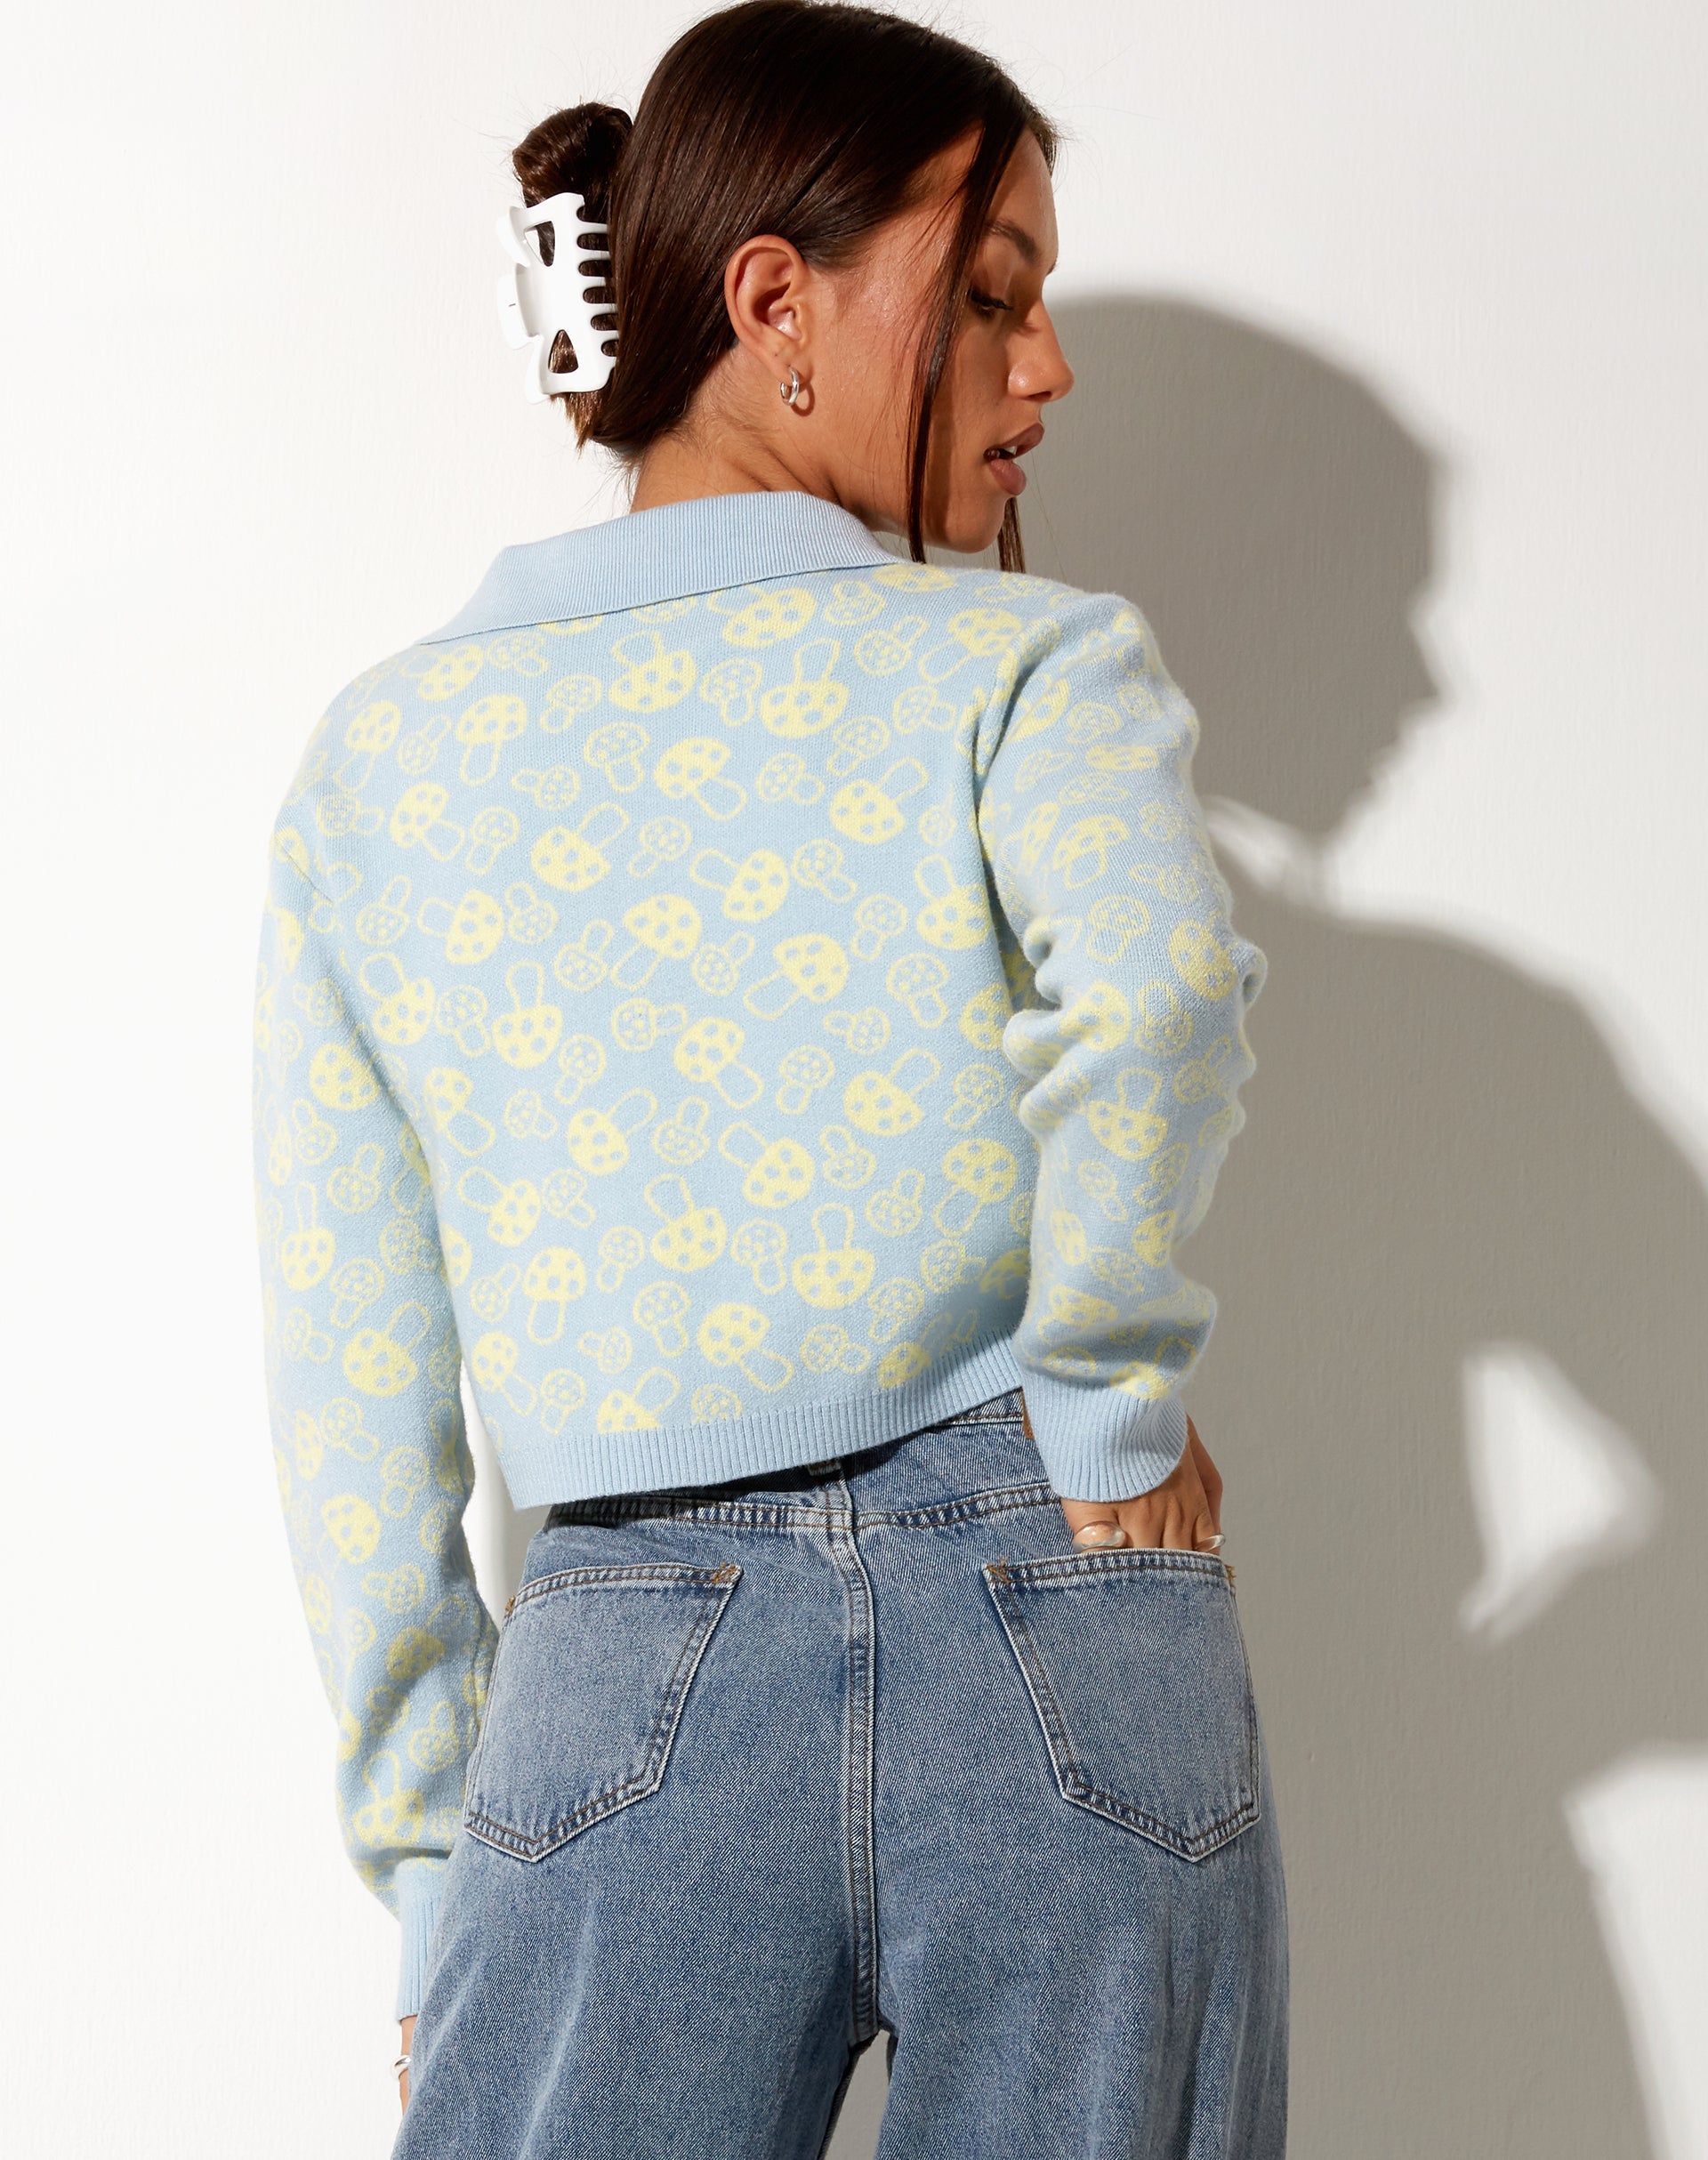 Image of Bufo Cardigan in Baby Shroom Blue and Yellow